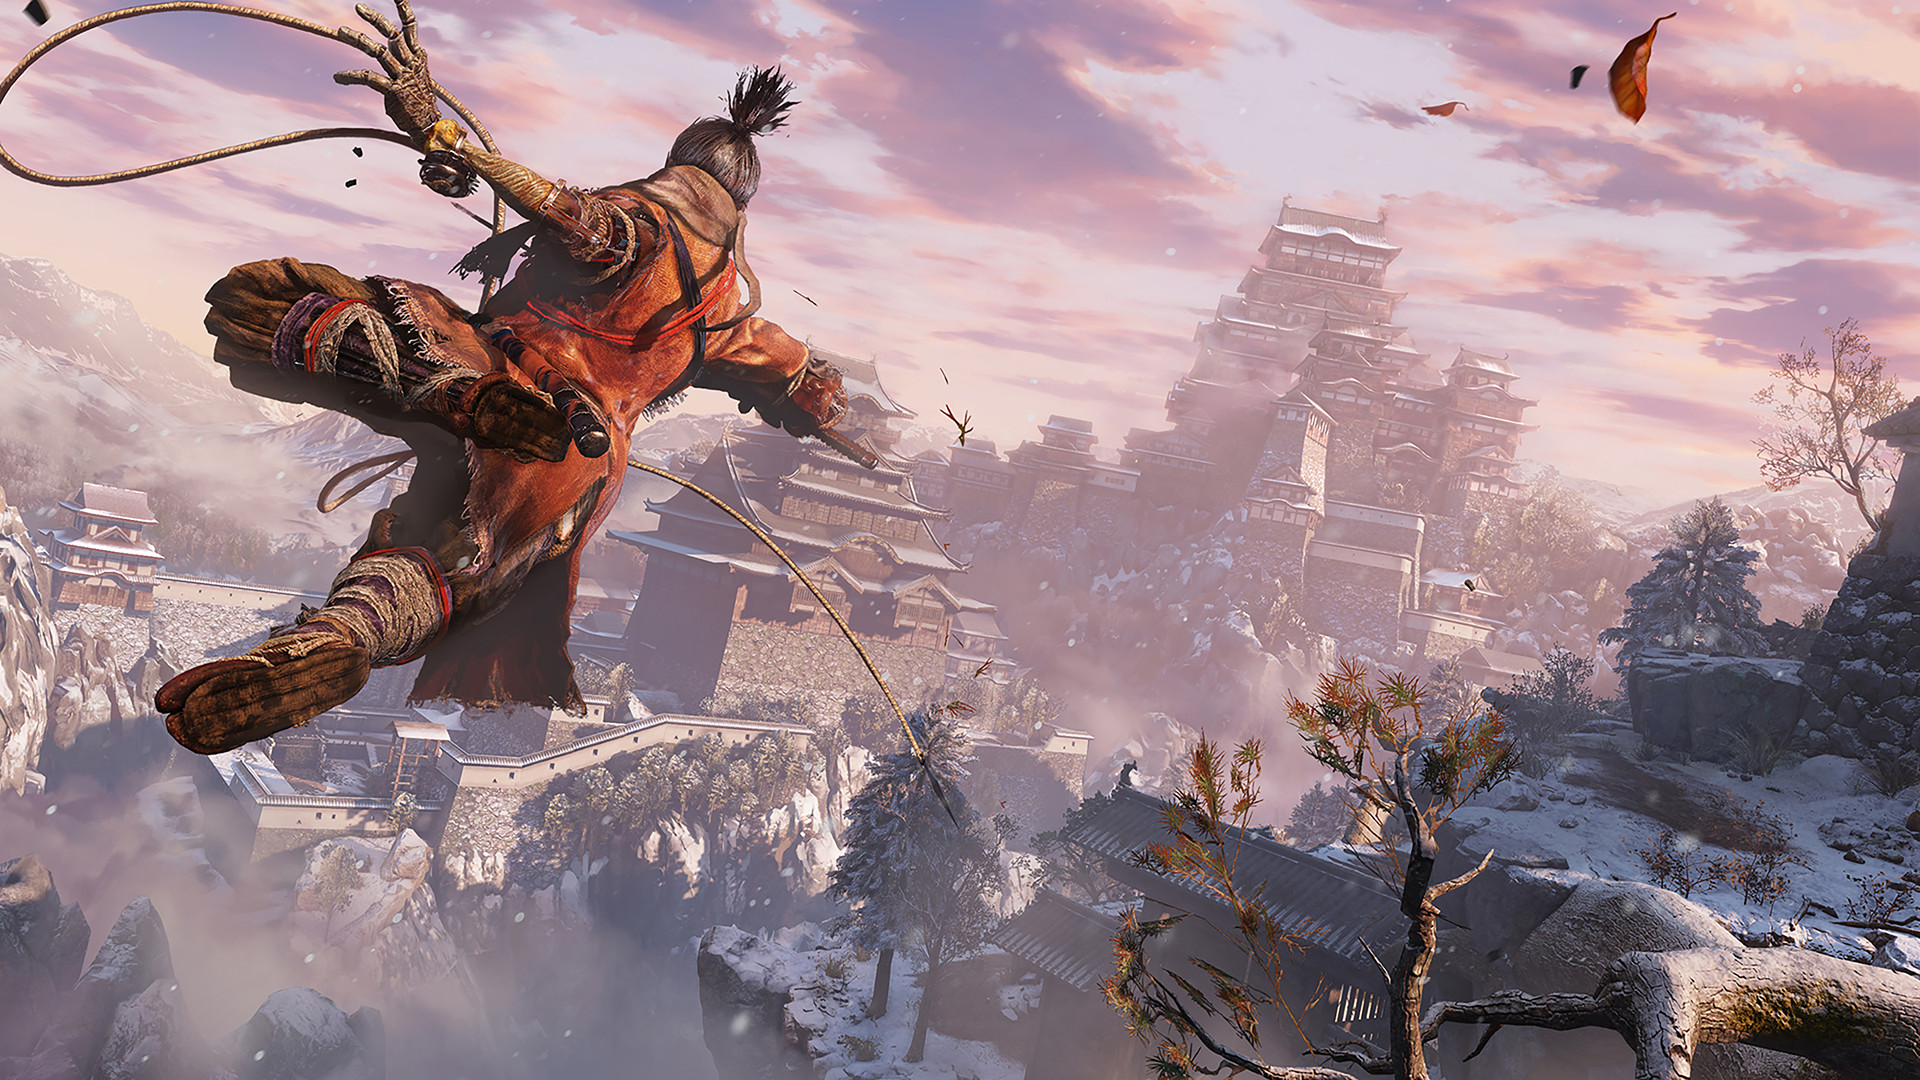 Find the best laptops for Sekiro: Shadows Die Twice - GOTY Edition